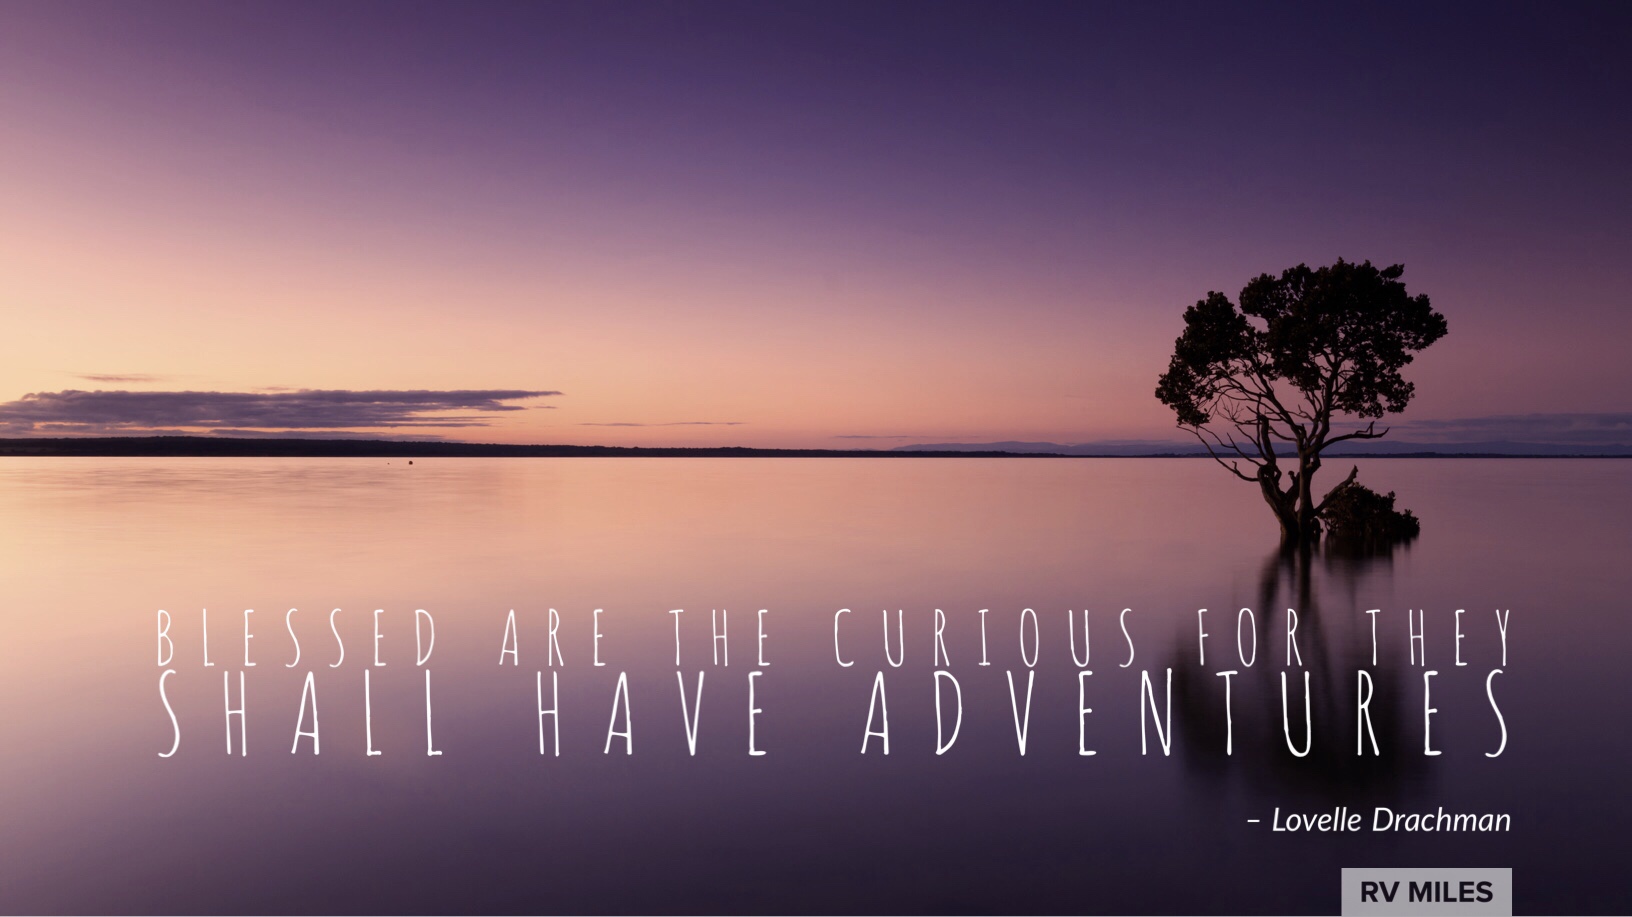 15 Camping and Travel Quotes Sure to Give You Wanderlust